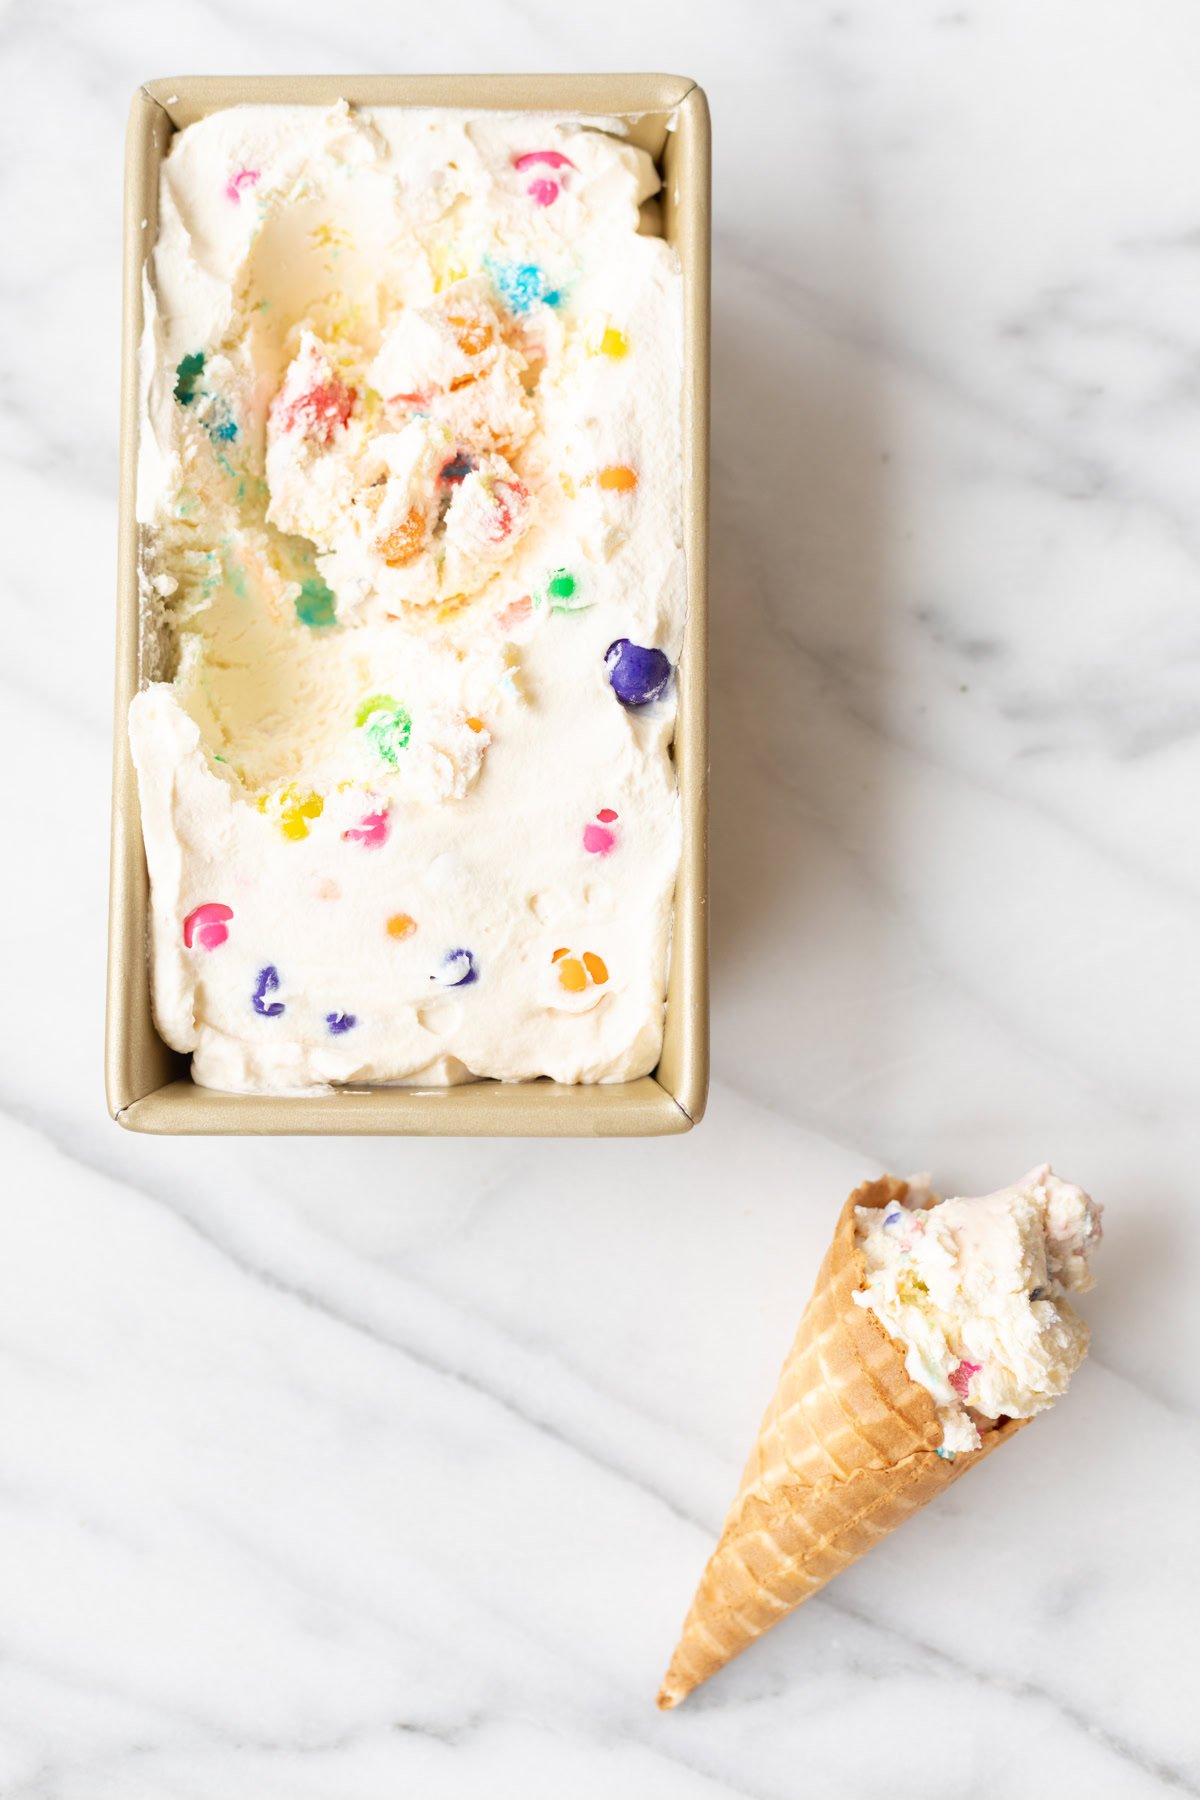 A rectangular container of colorful bubble gum ice cream sits on a marble surface with a scoop of the same ice cream in a waffle cone next to it.